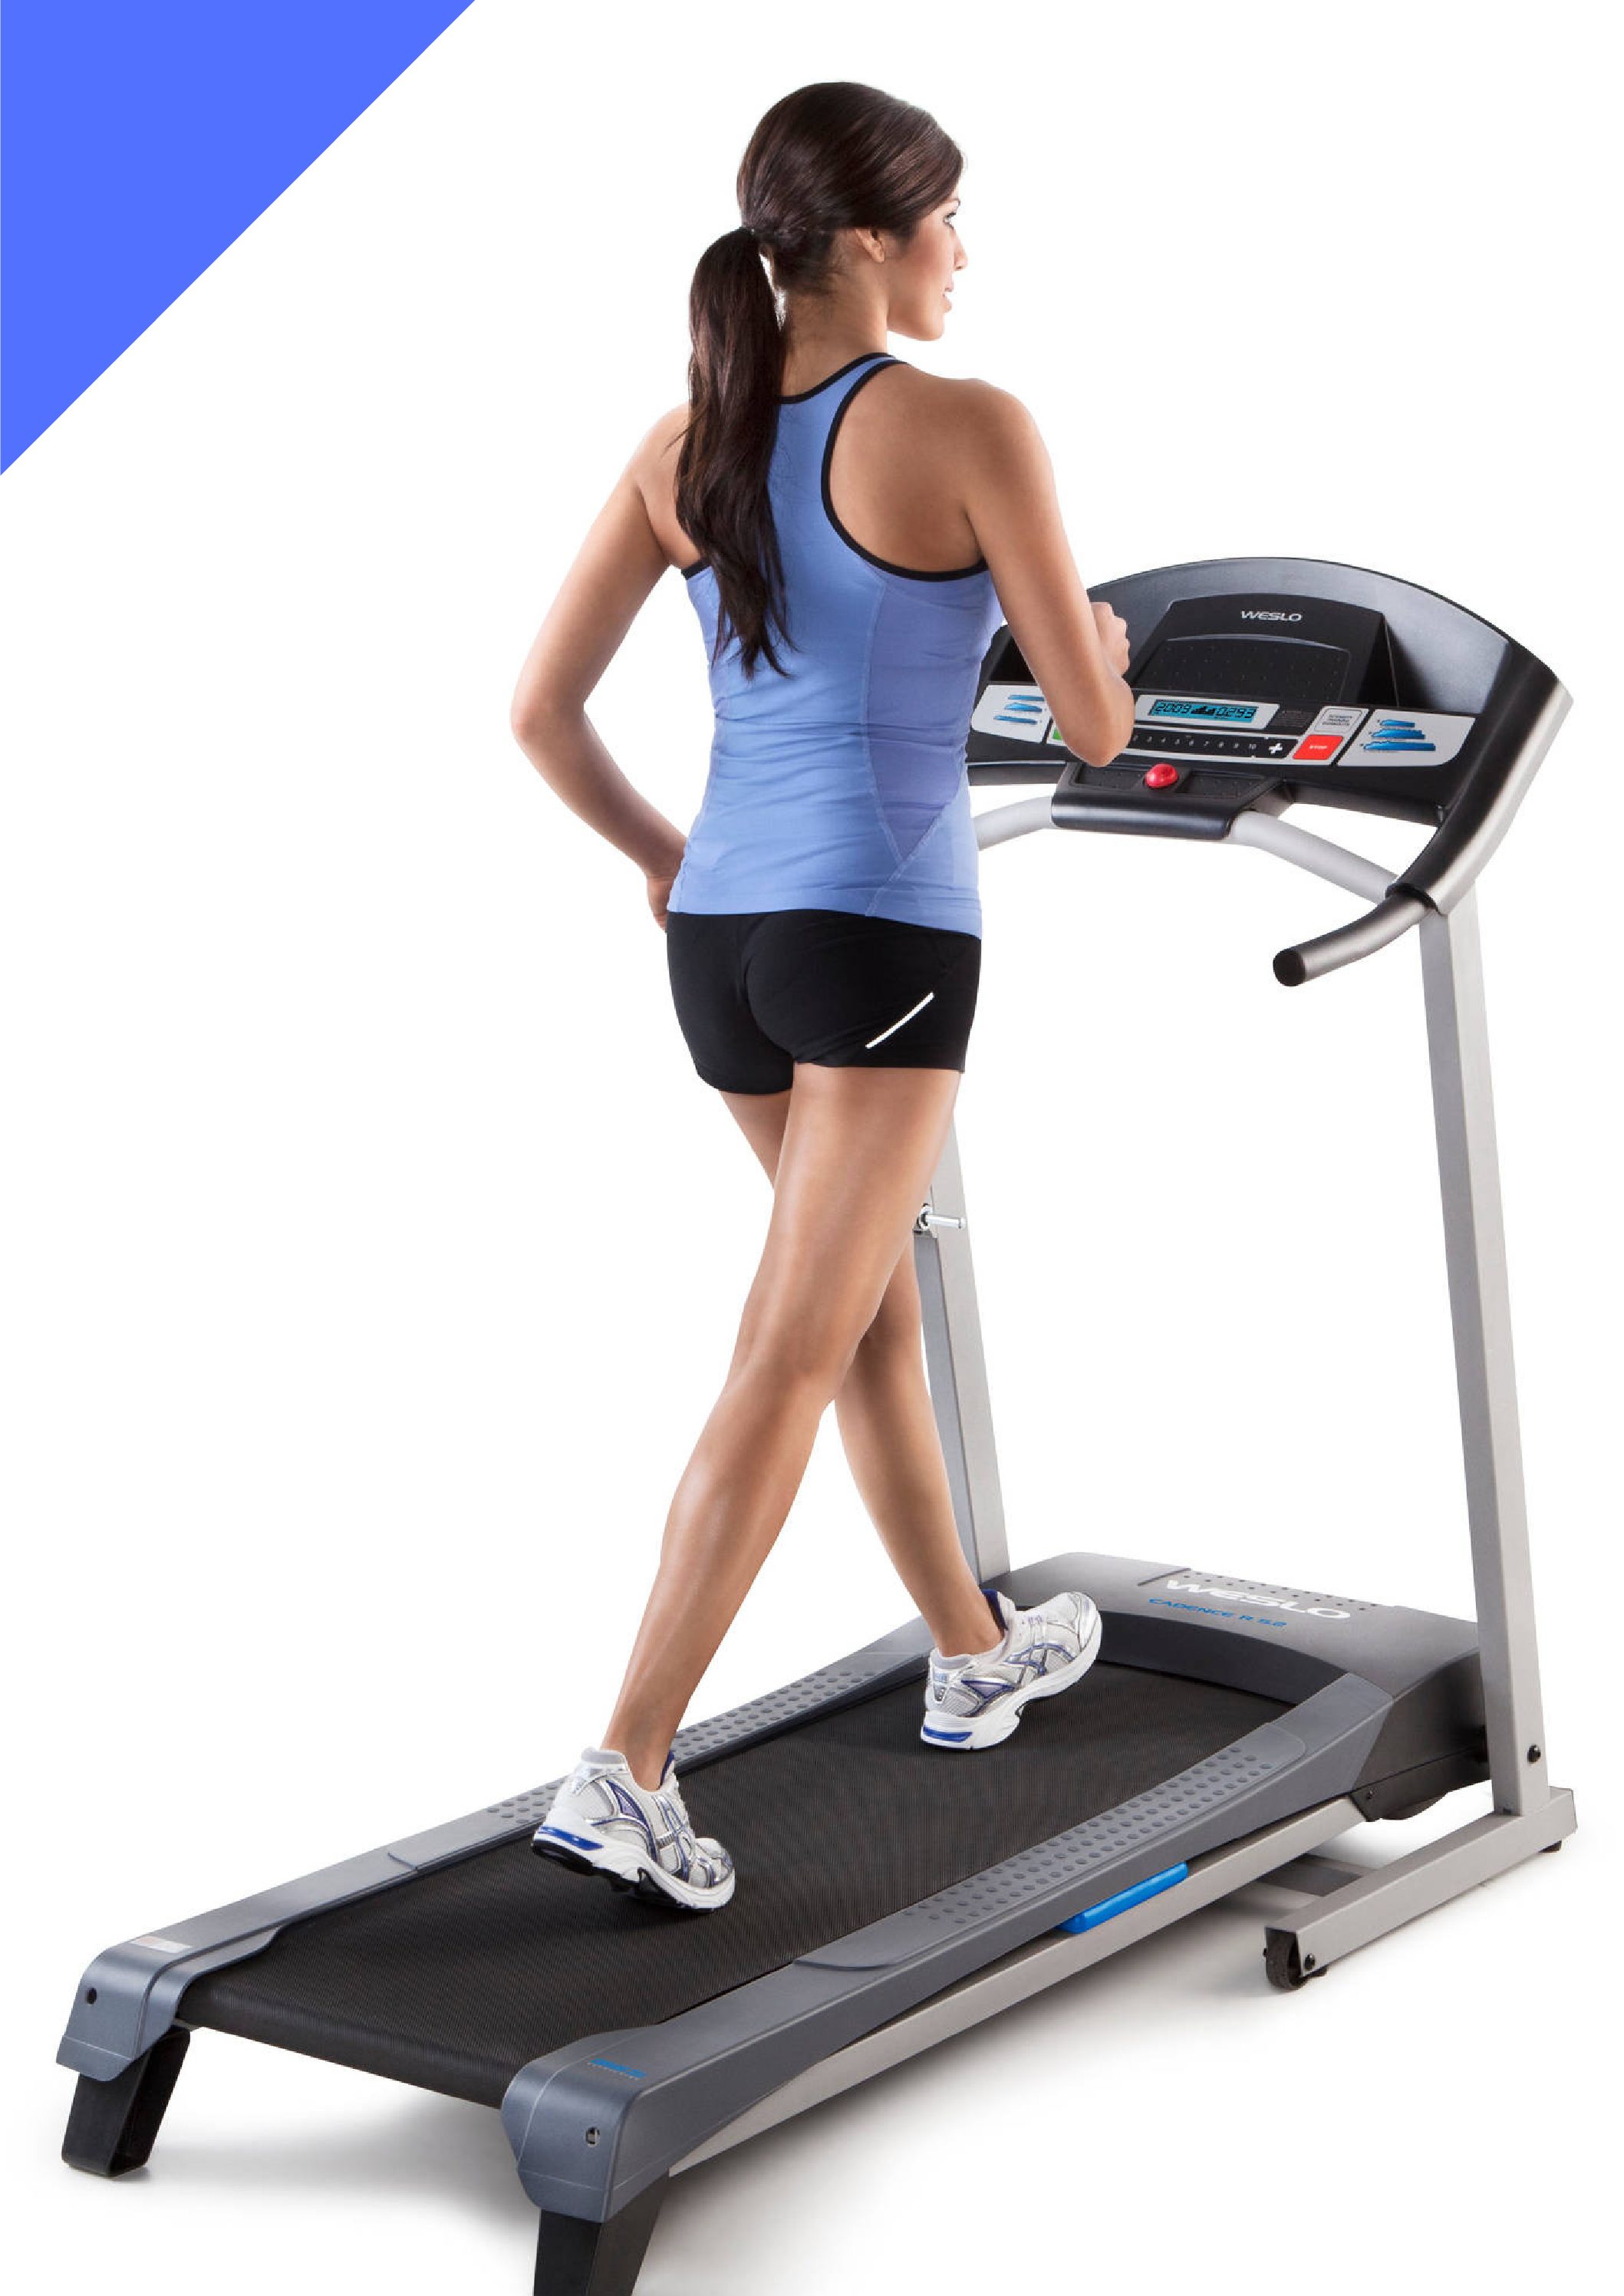 How owning a treadmill can get you slim